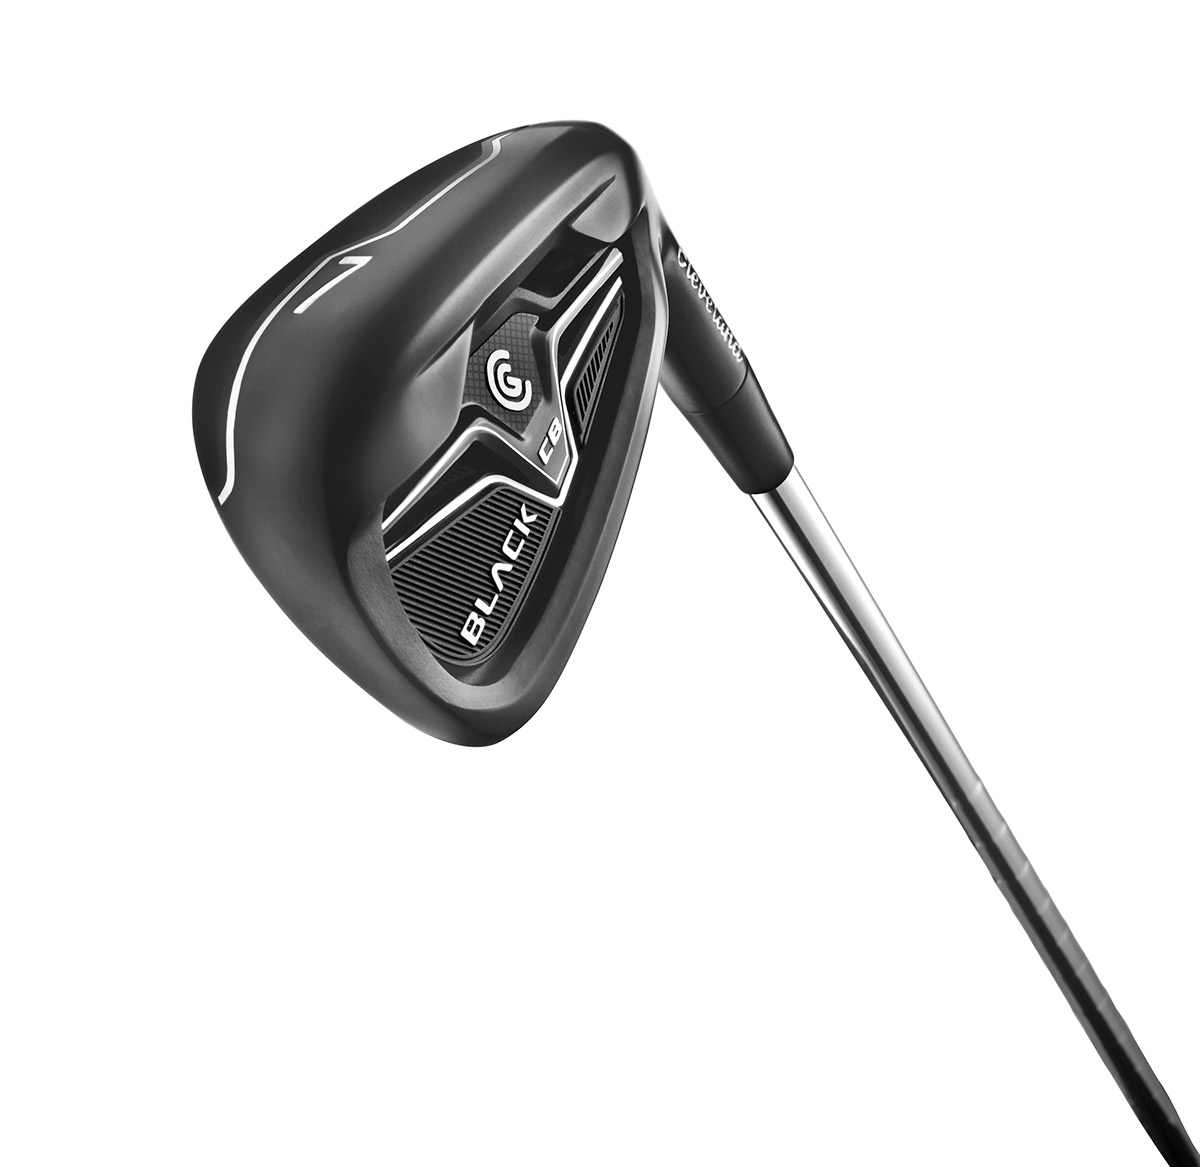 golf Cleveland Golf Irons black rich design target consumer persona Consumer Products sporting goods